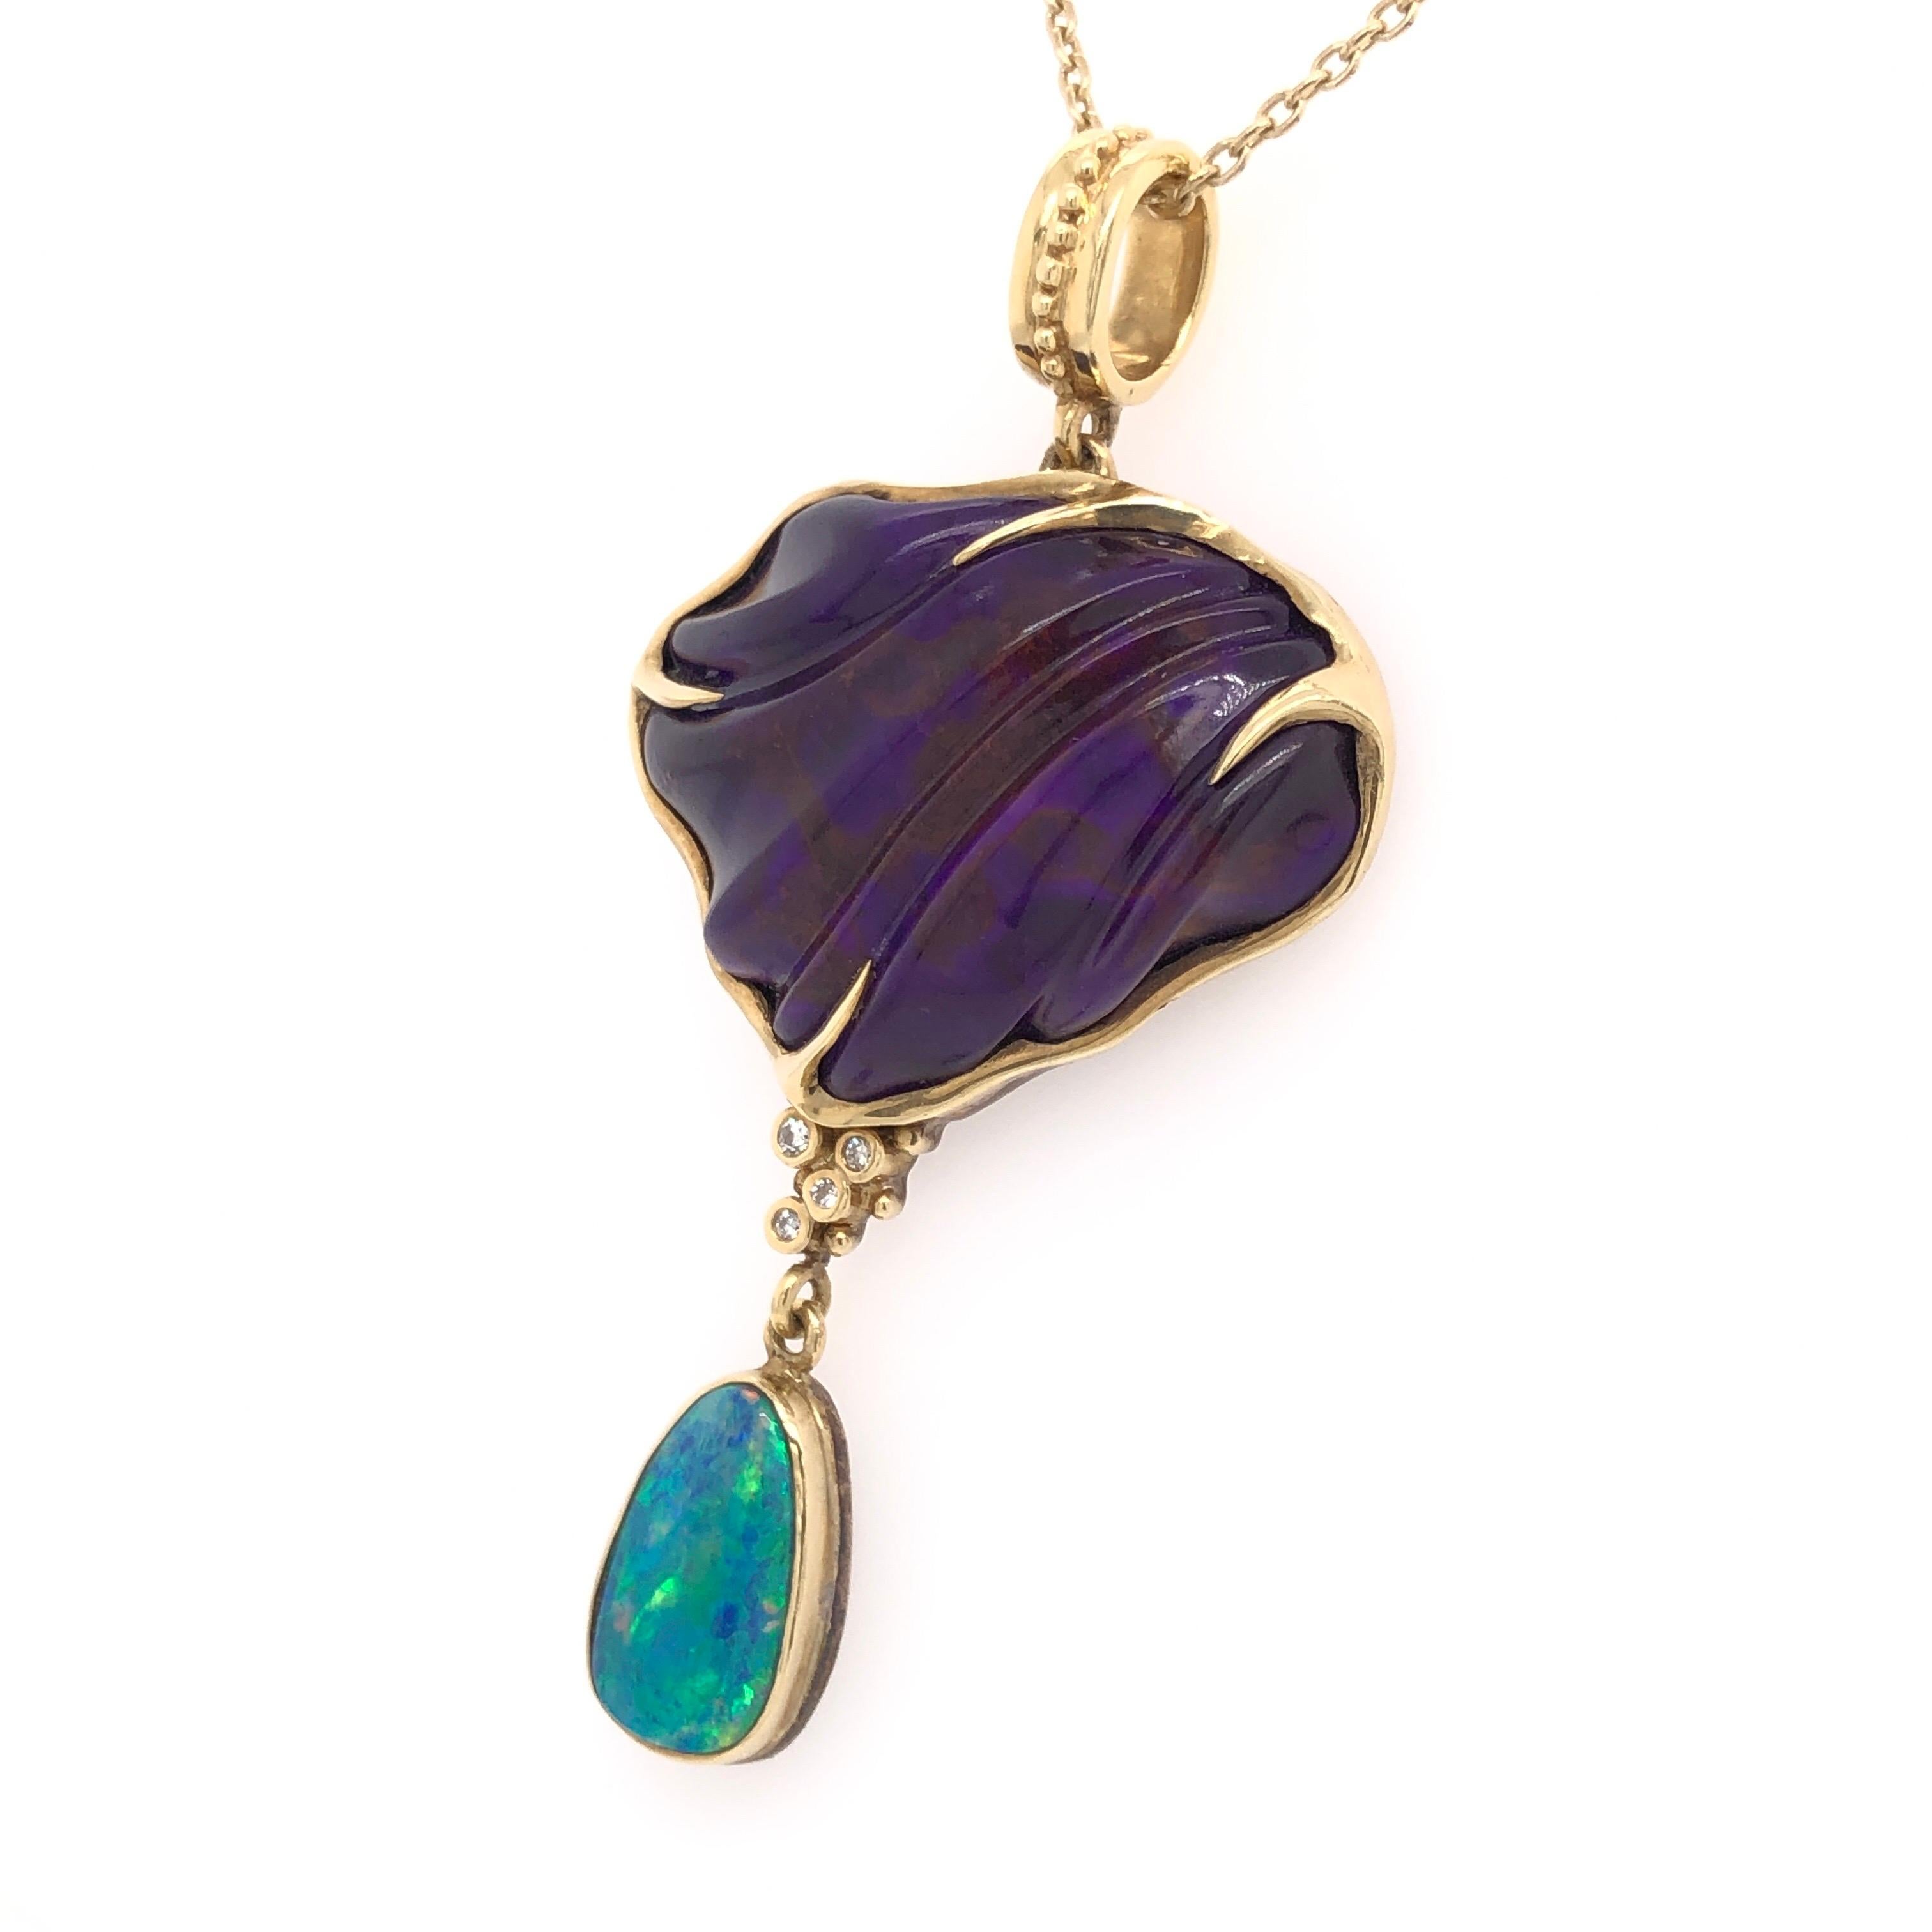 The organic form and deep color of this 28.29 CT sugilite is only enhanced by the four diamonds and pear shaped opal that dangle from it. All is set into a sterling silver setting that has been flashed with 18K yellow gold. 

Sugilite was first